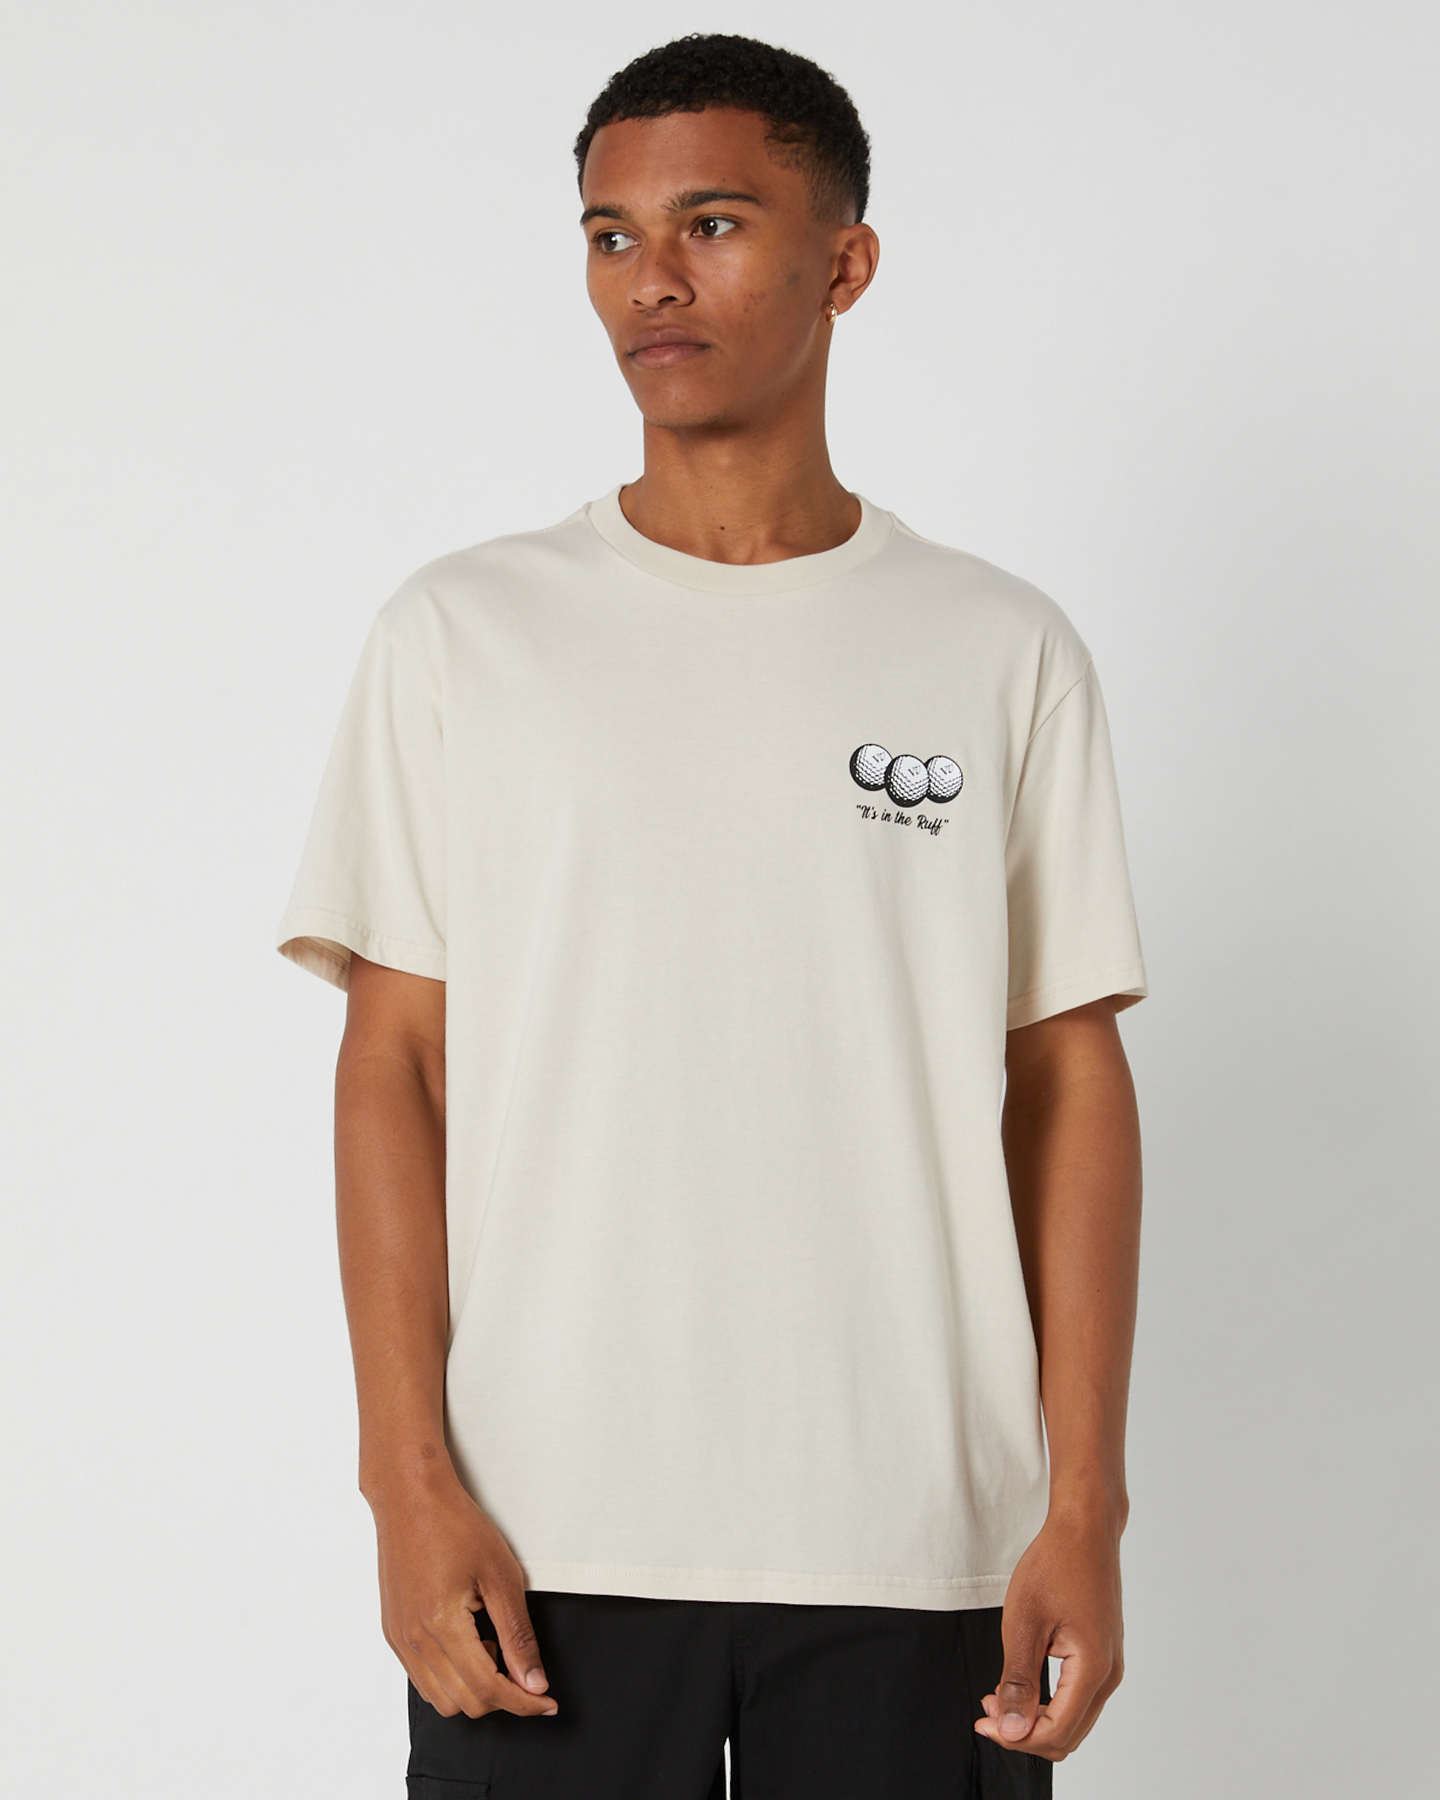 Rivvia Projects In The Rough T-Shirt - Beige | SurfStitch